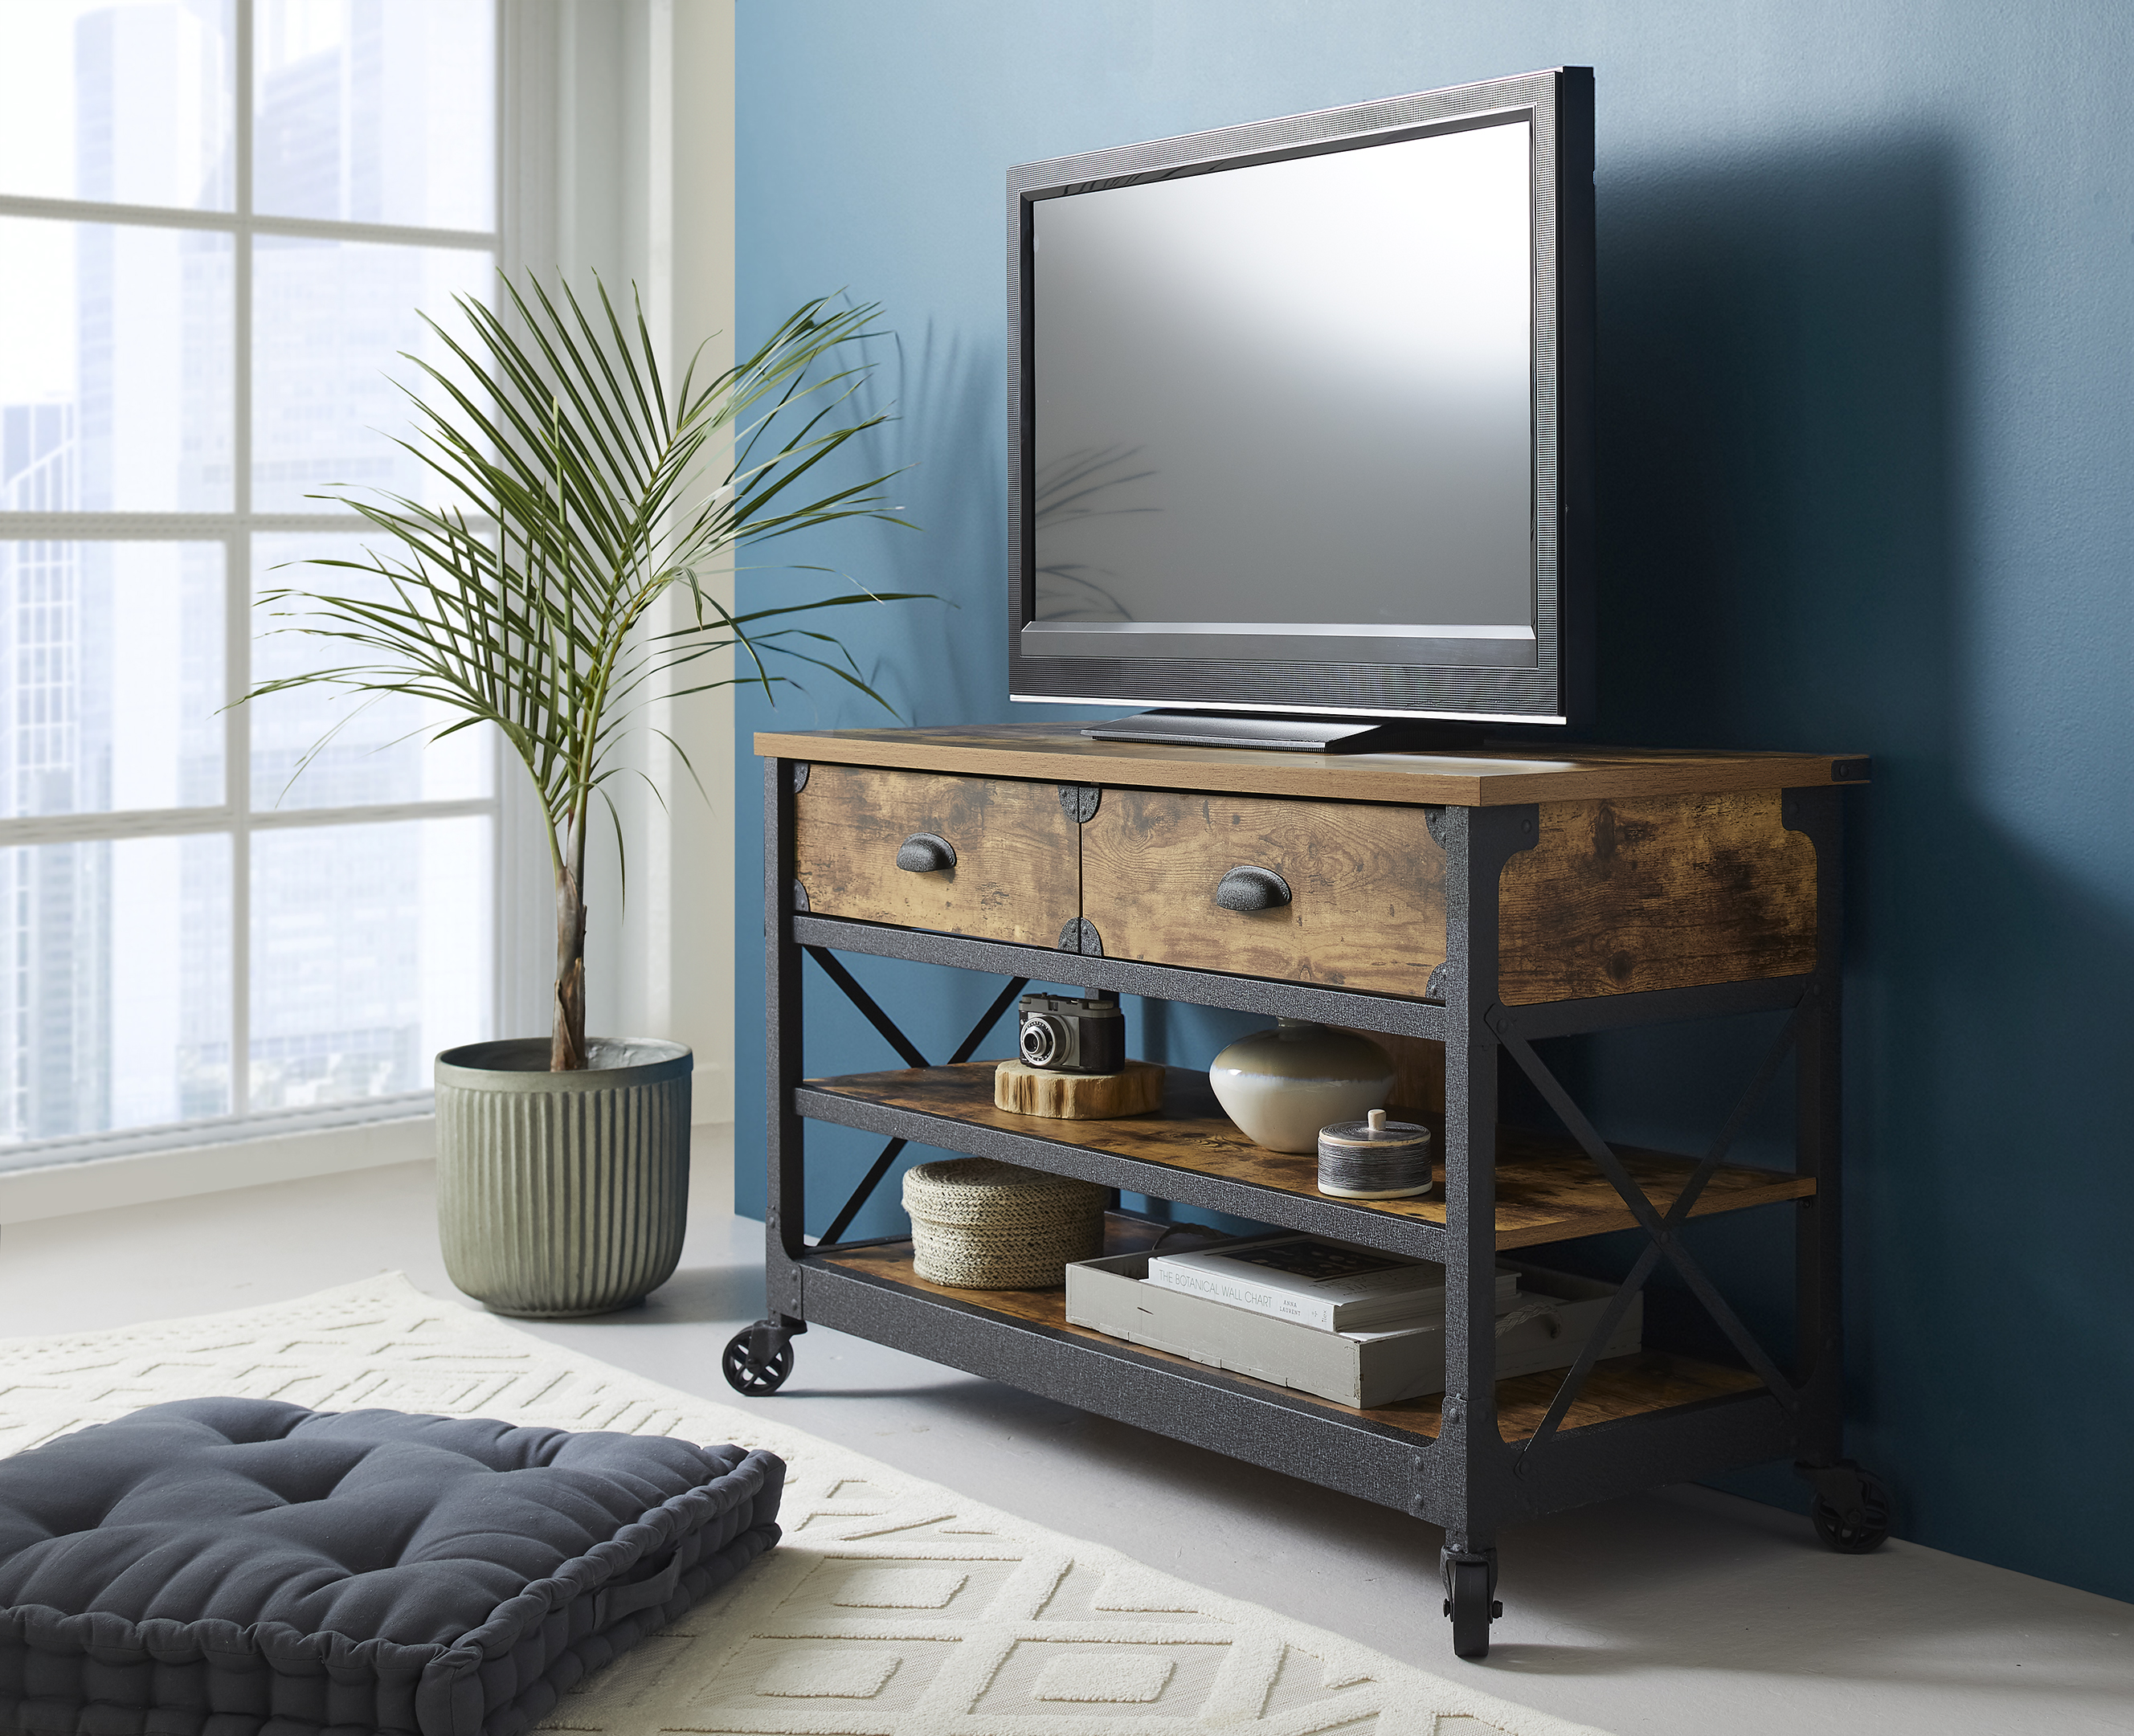 Better Homes & Gardens Rustic Country TV Stand for TVs up to 52", Weathered Pine Finish - image 1 of 11